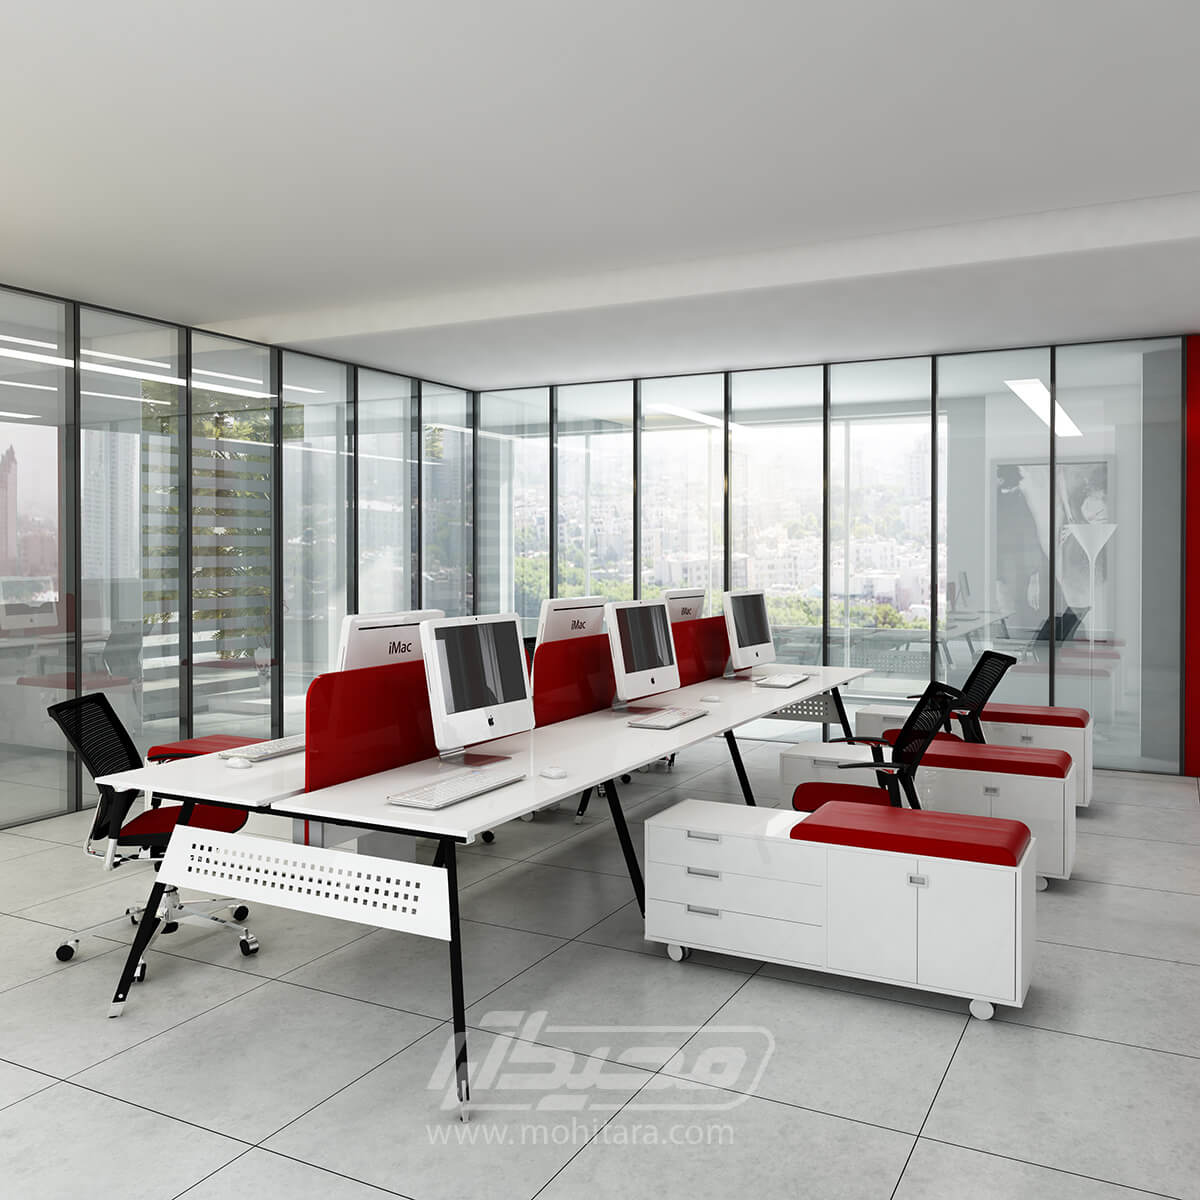 Red theme office furniture